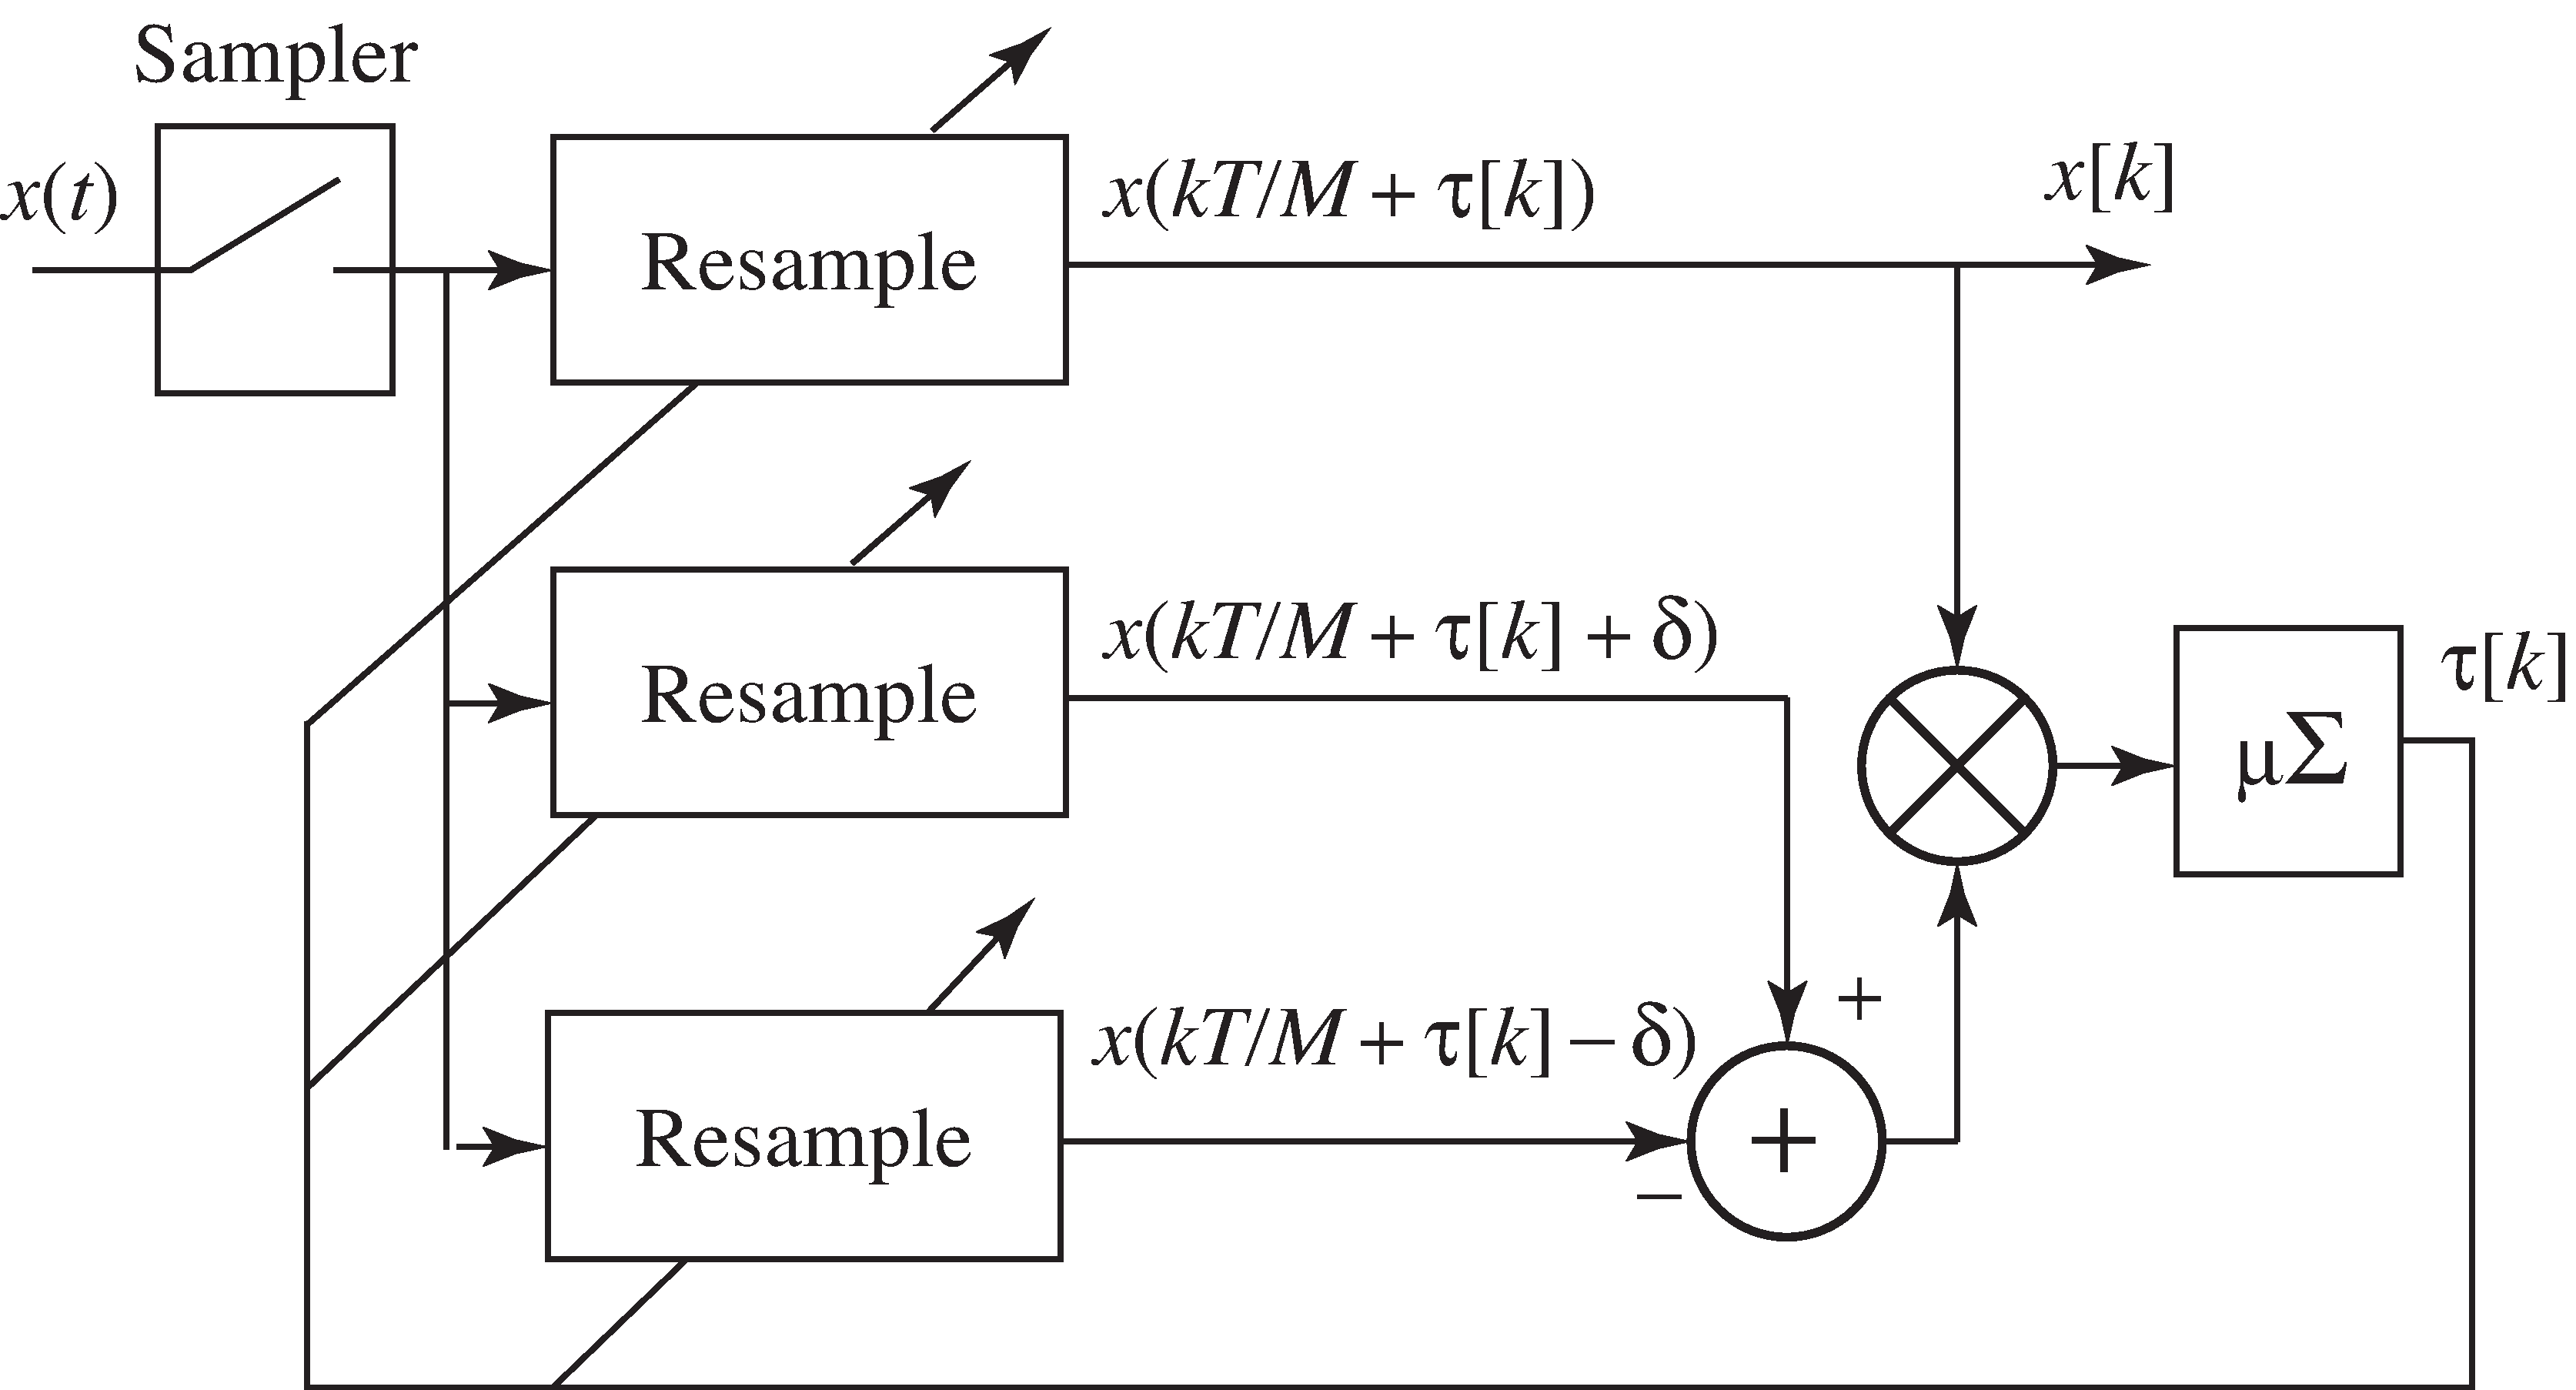 One implementation of the adaptive element Equation 25 uses three digital interpolations (resamplers). After the τ[k] converge, the output x[k] is a sampled version of the input x(t), with the samples taken at times that maximize the power of the output.